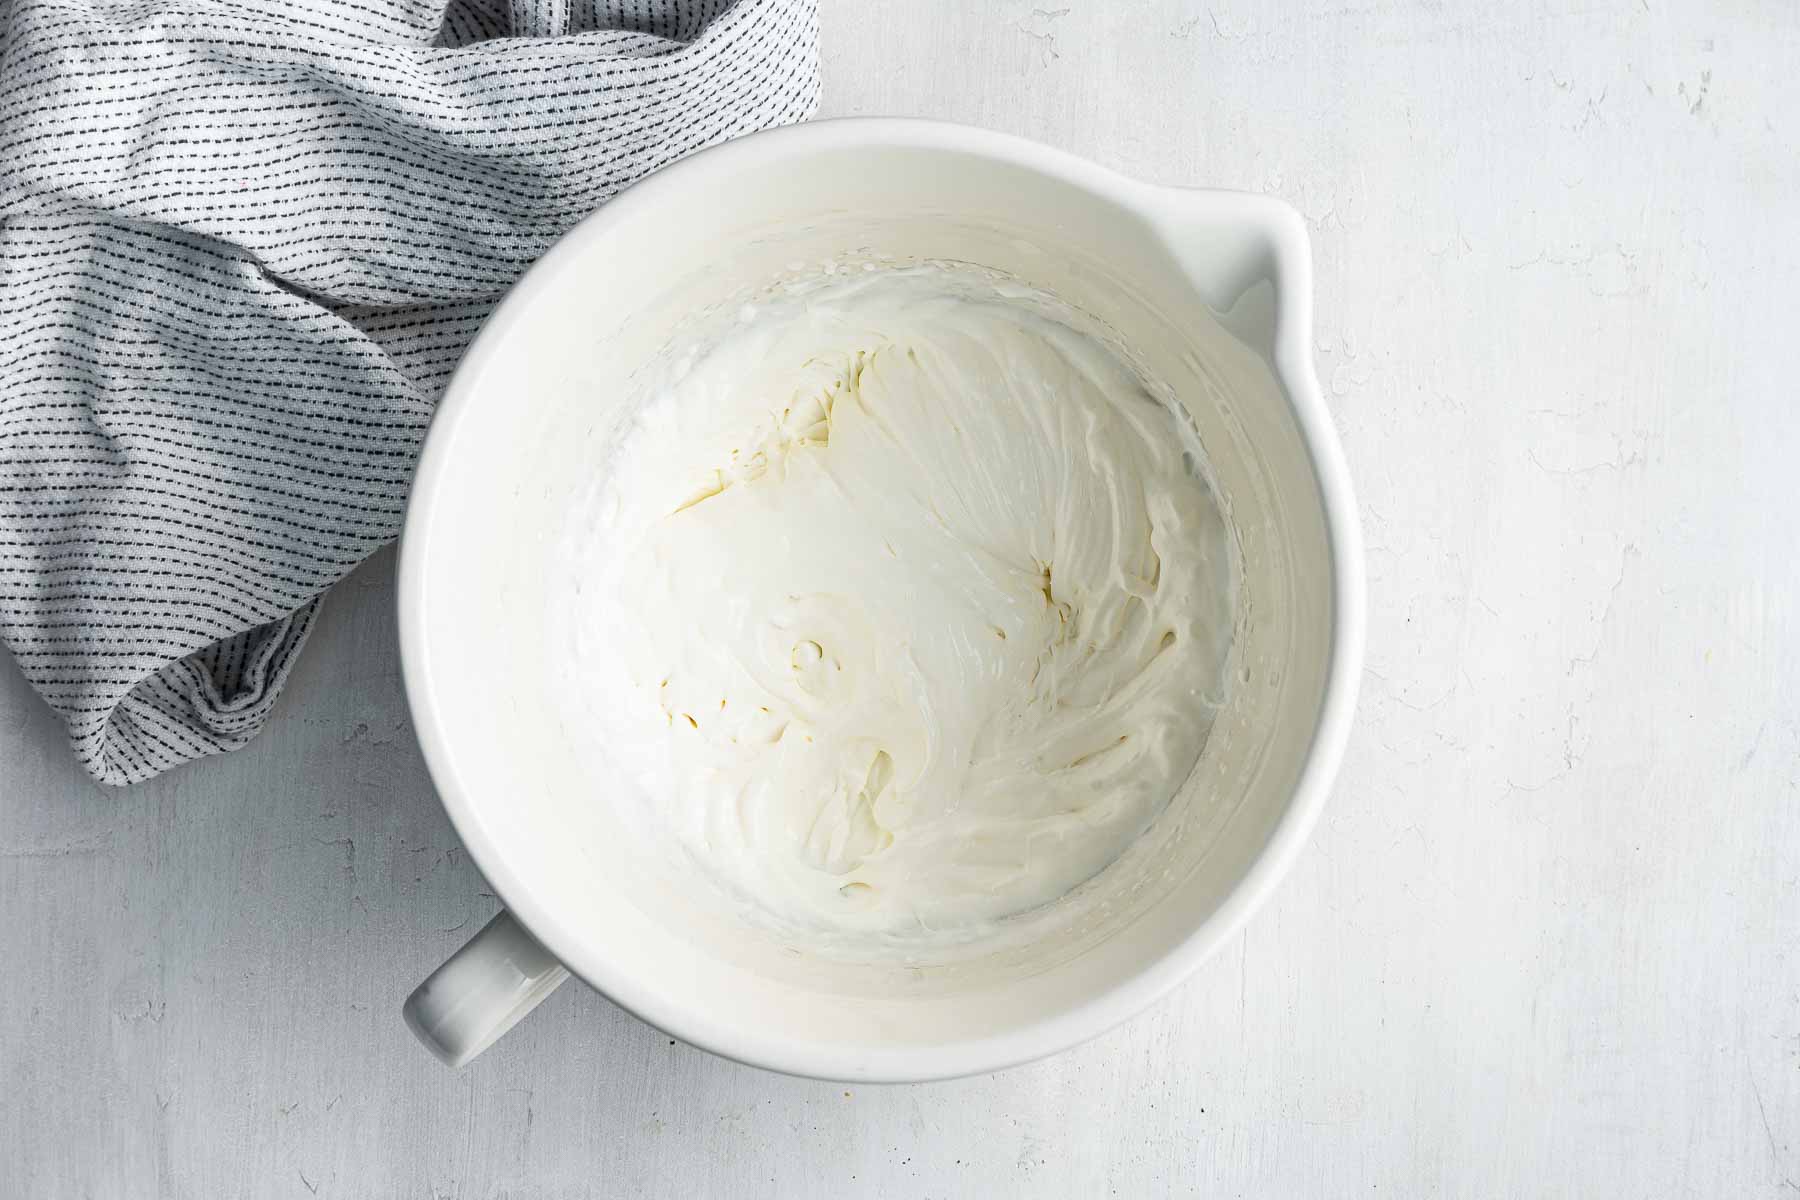 Heavy whipping cream in a white bowl.